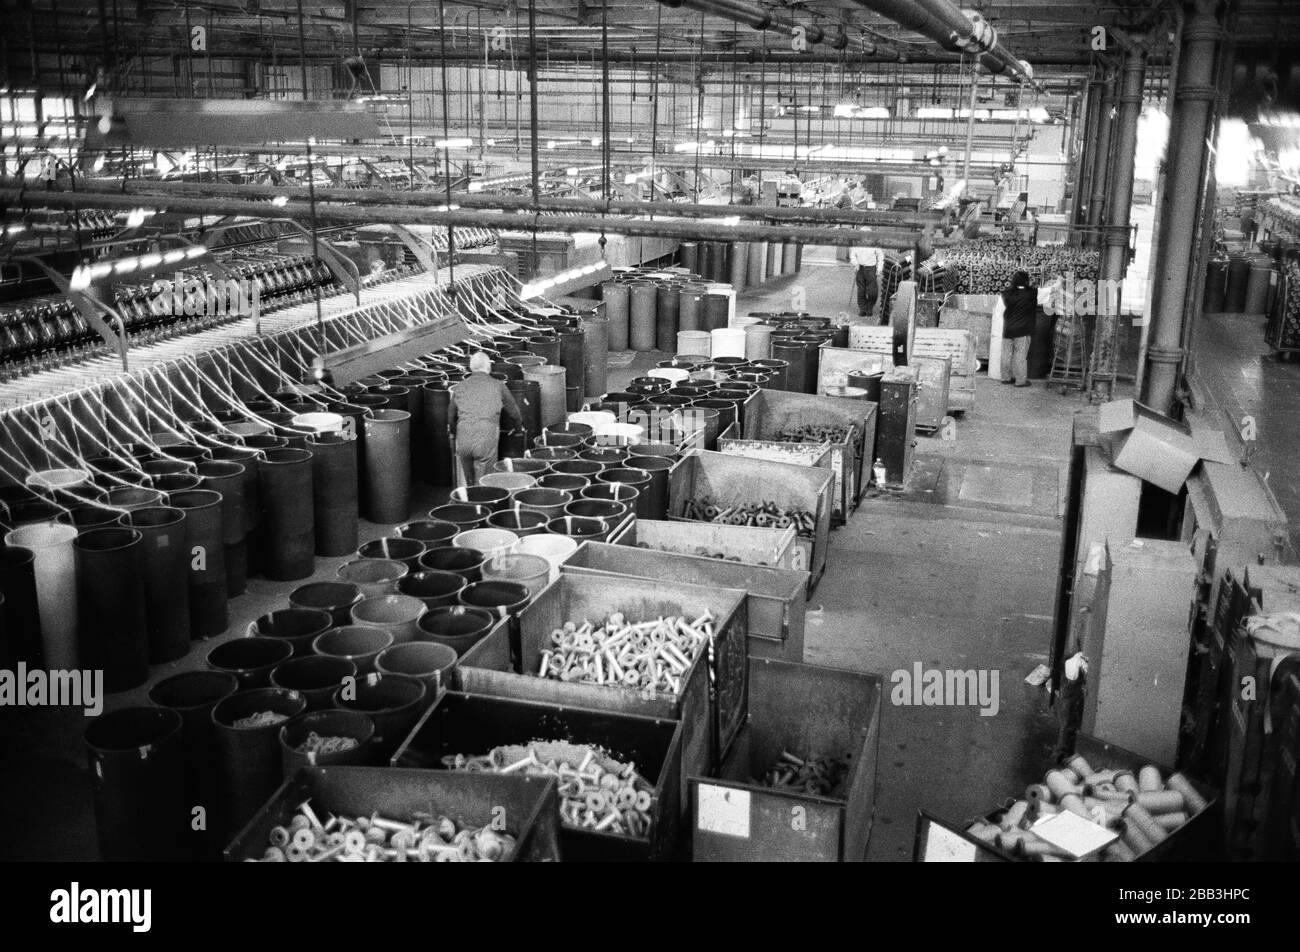 An overview of the mill floor at Tay Spinners mill in Dundee, Scotland. This factory was the last jute spinning mill in Europe when it closed for the final time in 1998. The city of Dundee had been famous throughout history for the three 'Js' - jute, jam and journalism. Stock Photo